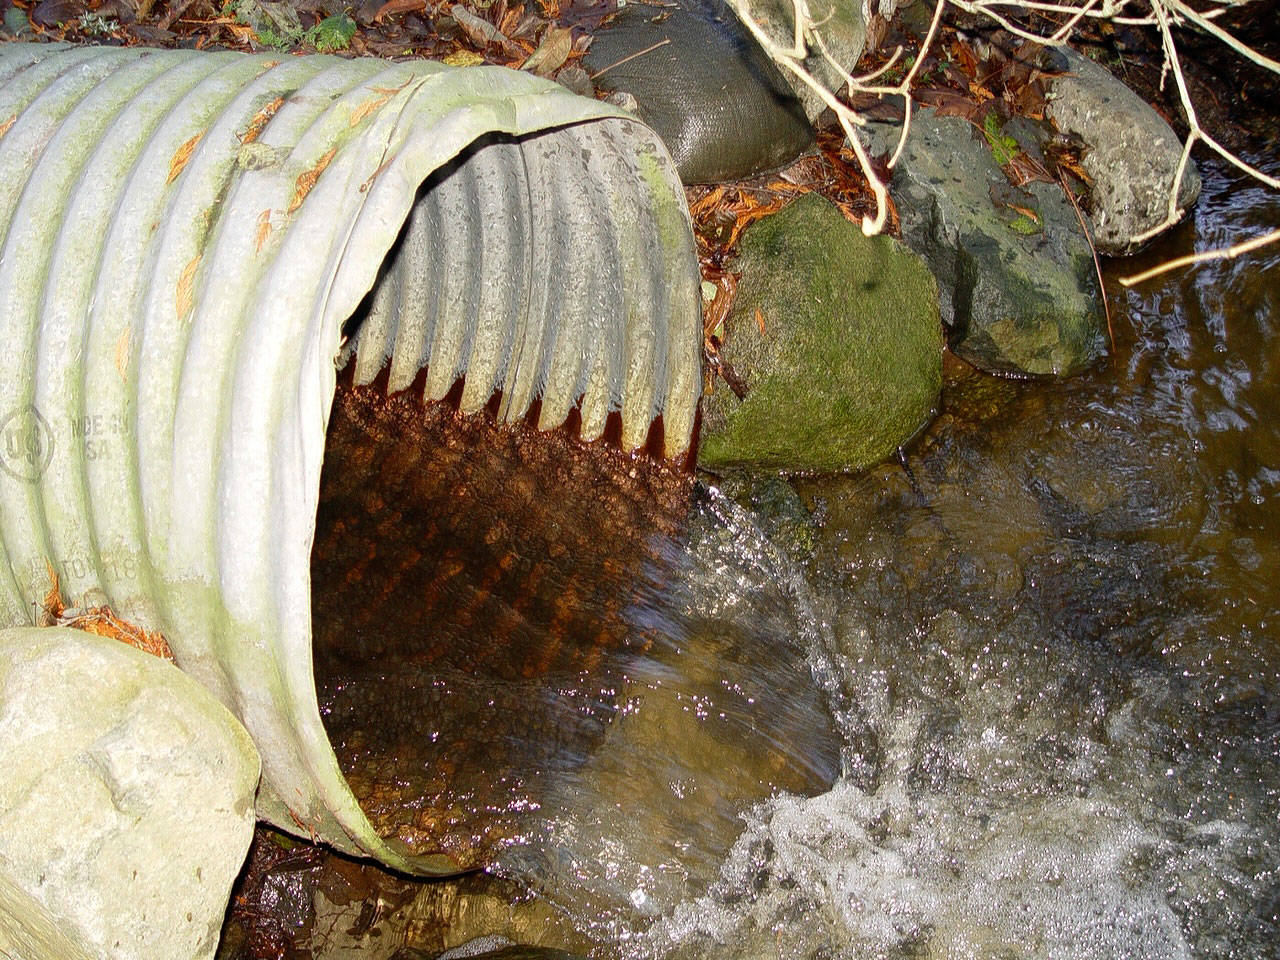 The existing culvert consists of a three-foot-wide corrugated metal pipe that runs 500 feet from the intersection of Hemlock Street and Colchester Drive, through a concrete flow control structure, over private property and into Puget Sound. (David Kimble courtesy photo)